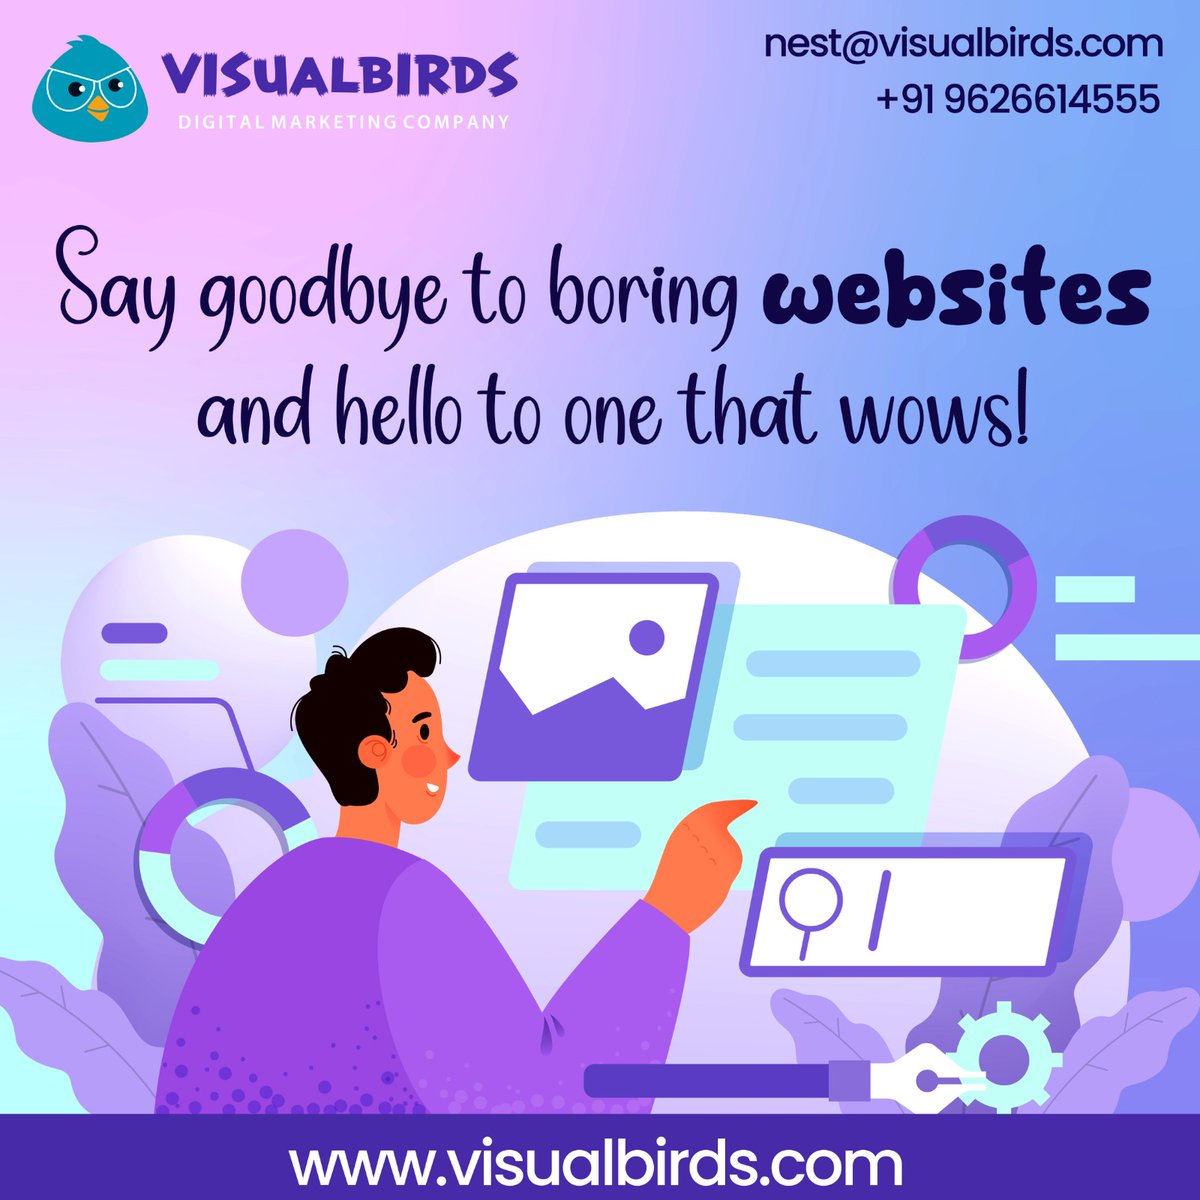 Say goodbye to boring websites and hello to one that wows!

visualbirds.com/website-design/ 

#websitedesign #visualbirds #coimbatore